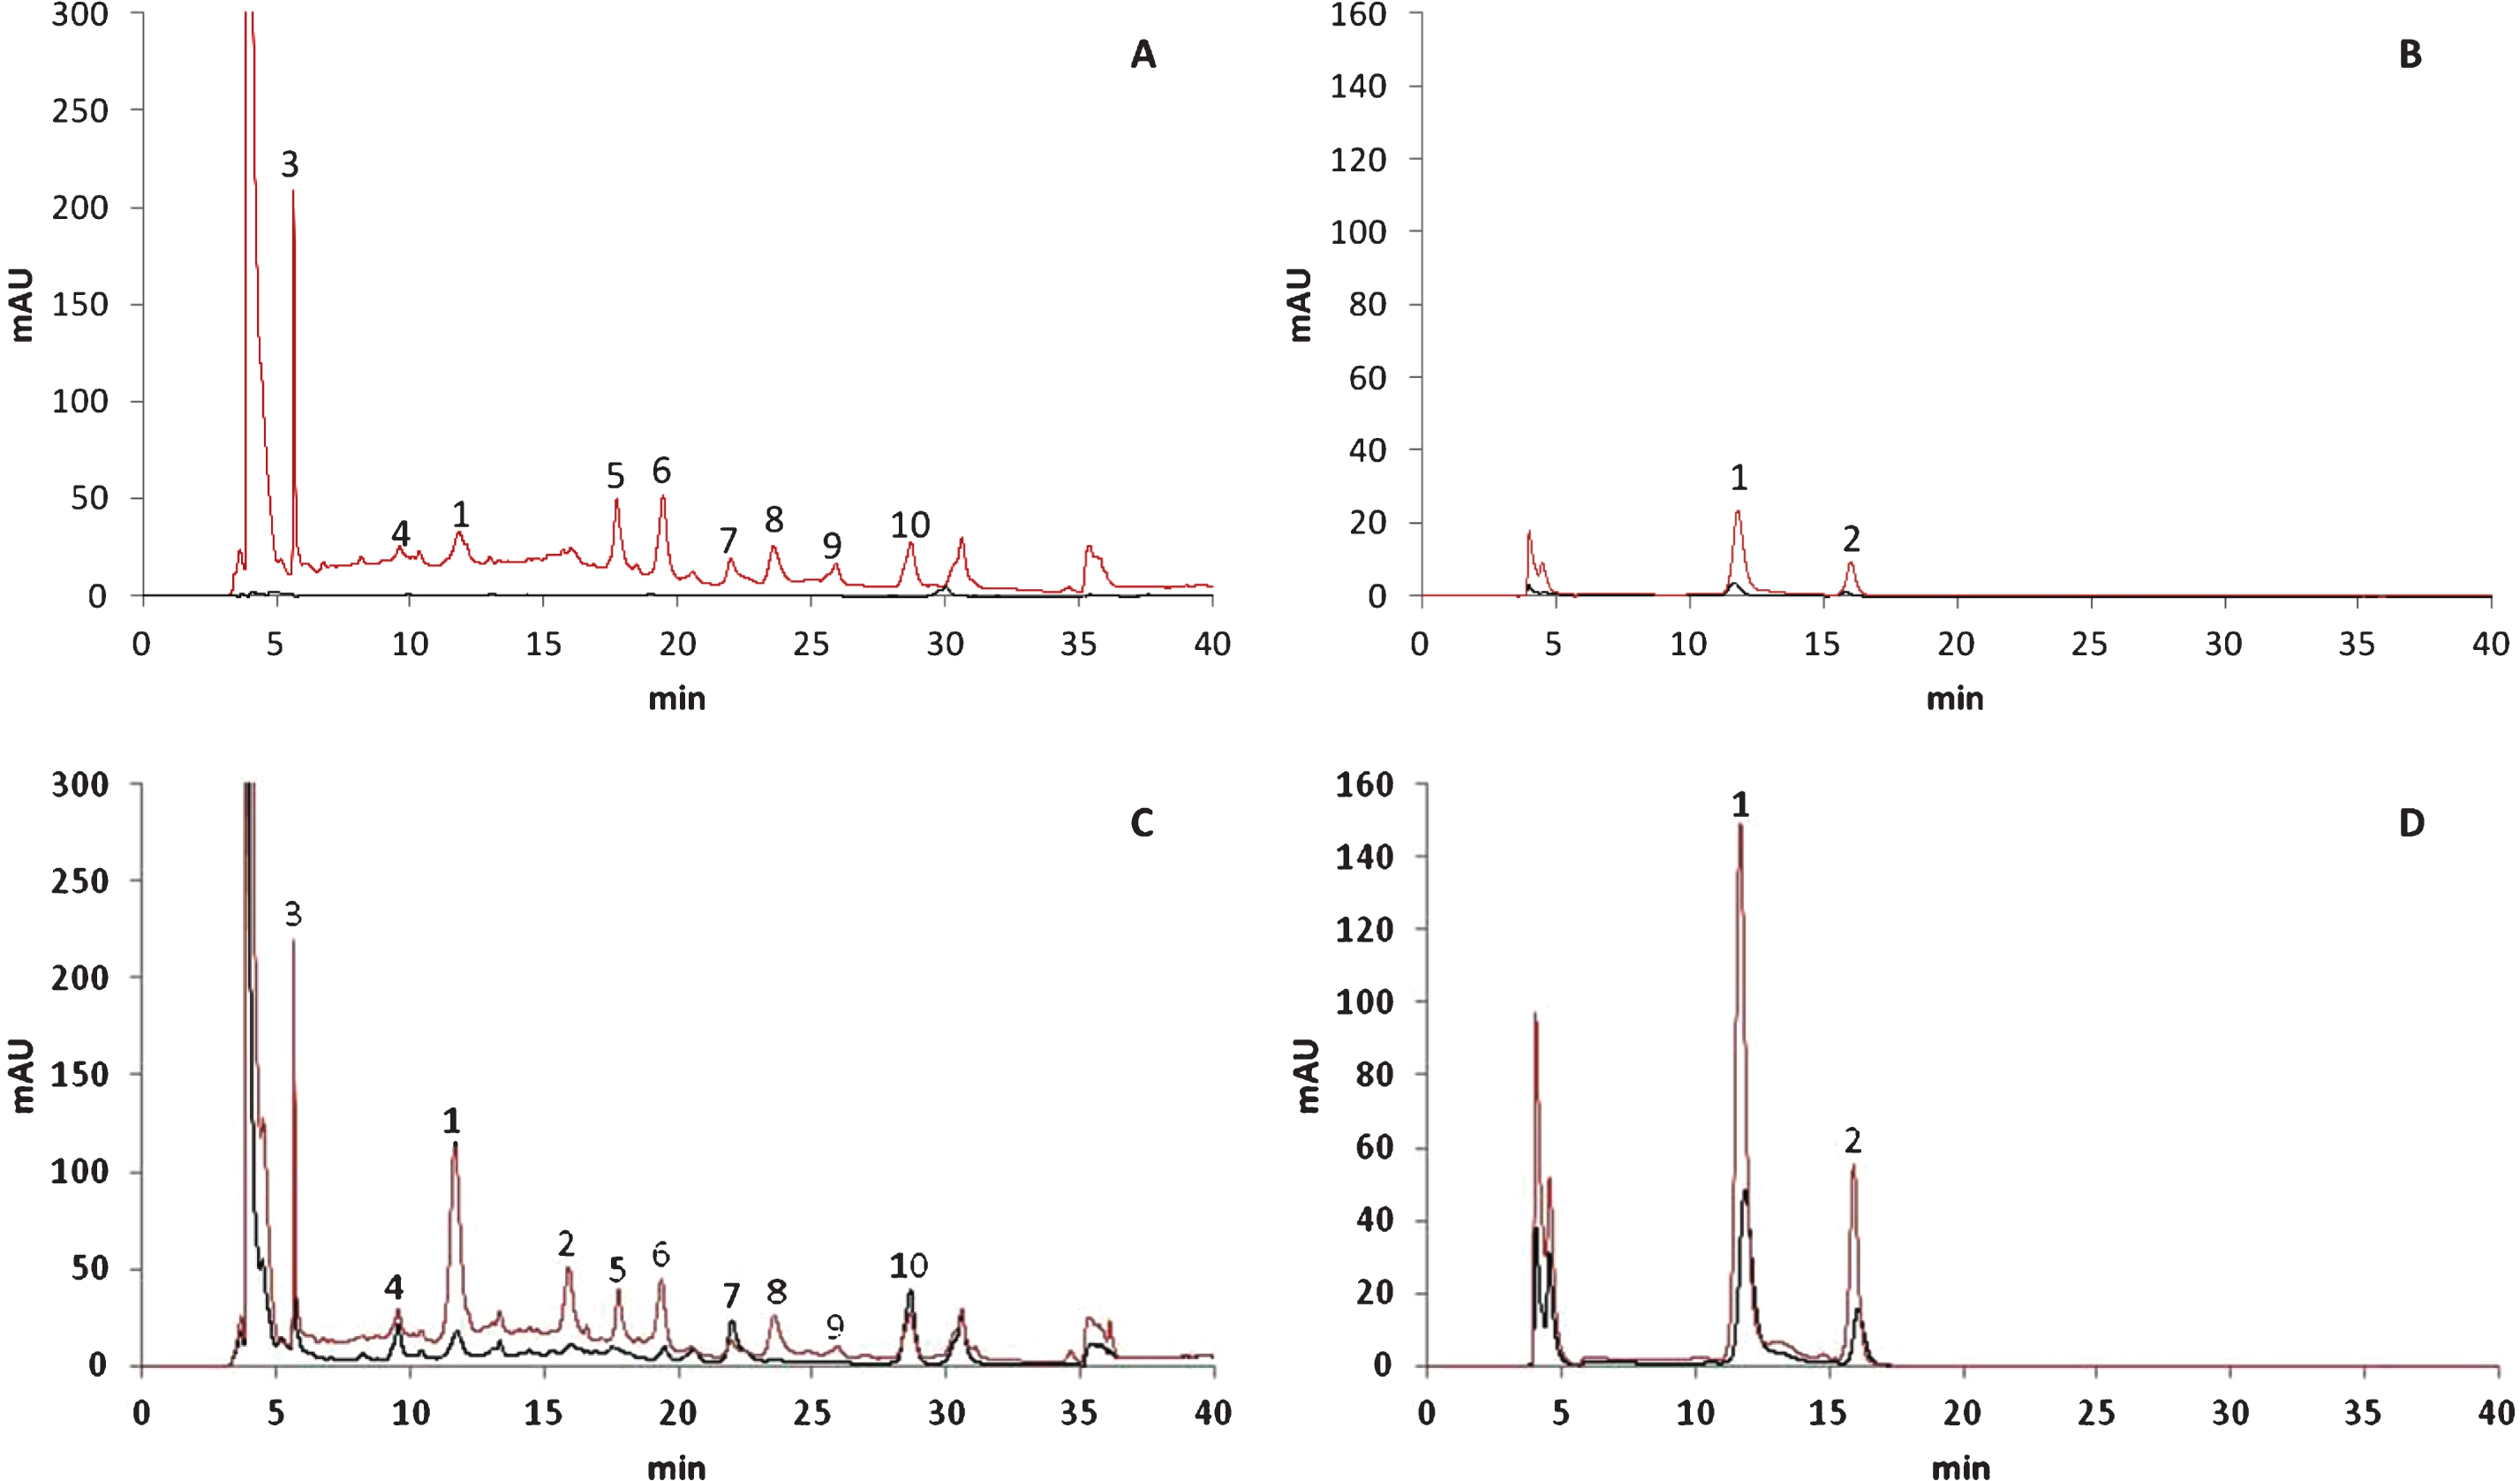 HPLC-DAD chromatograms of polyphenols in 50% red (A and B) and 100% red (C and D) stages recorded at 260 nm (A and C) and 500 nm (B and D). X-axis represents the retention time (min) and Y-axis the absorbance. Black lines indicate internal tissues and red lines external tissues. Peak numbers refer to Table 1.